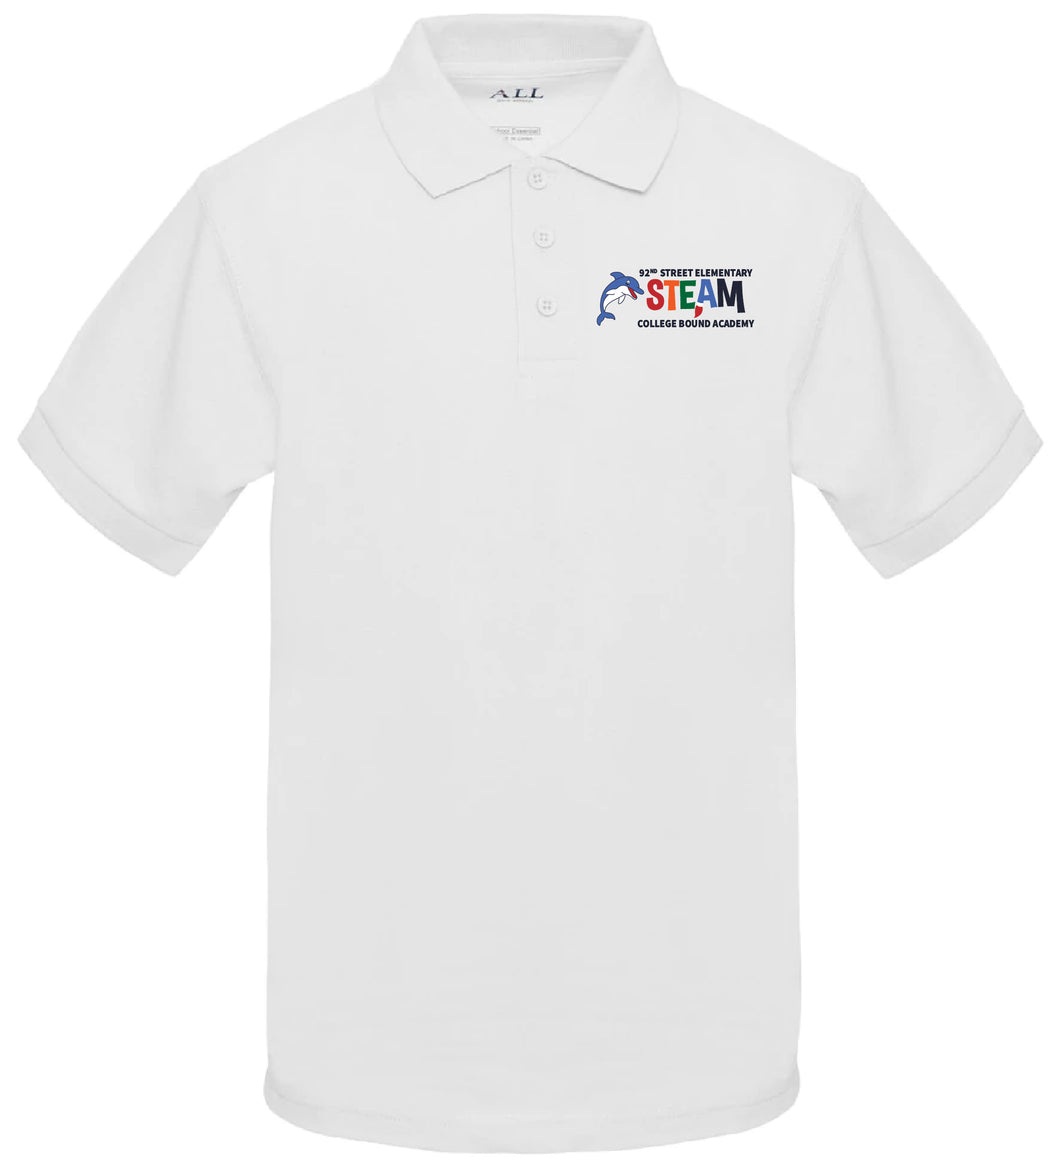 92nd Street Elementary Polo